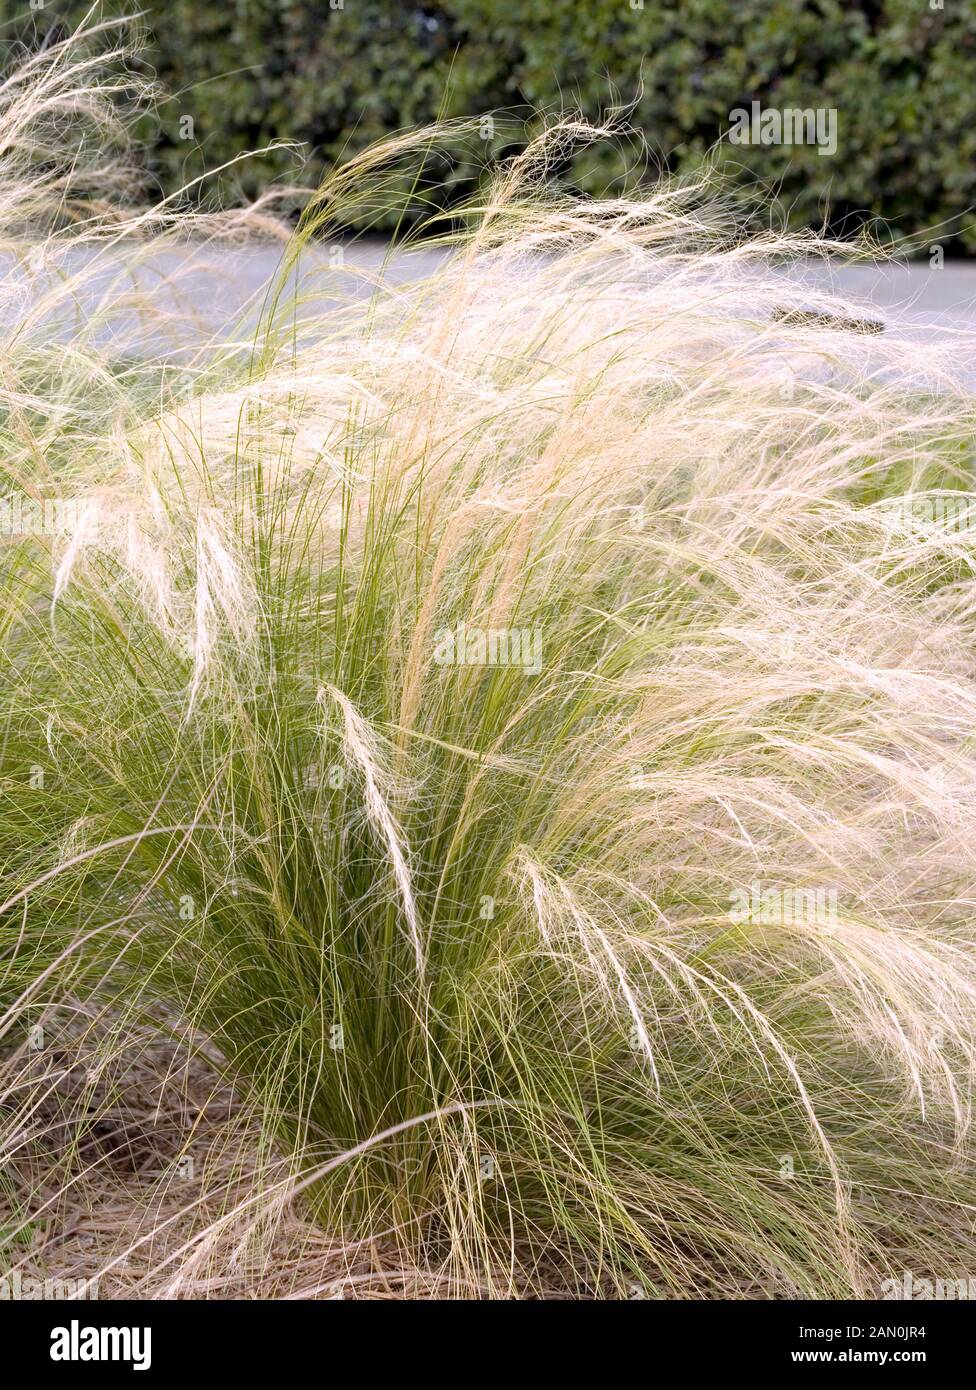 STIPA TENUISSIMA   MEXICAN FEATHER GRASS. Stock Photo